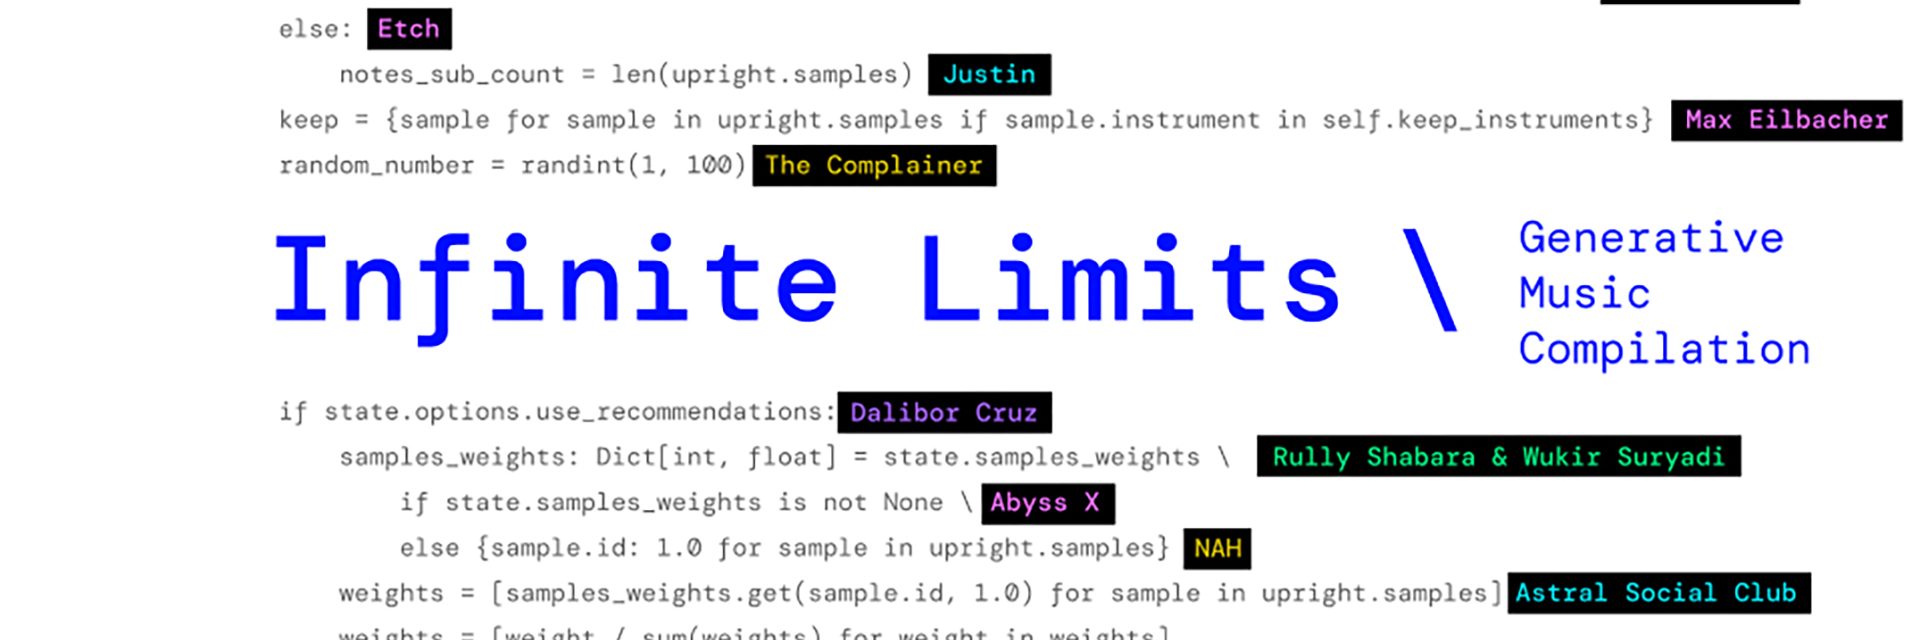 Mubert Releases AI-Generated Album Titled  â€œInfinite Limitsâ€� in Collaboration with 27 Artists â€” Mubert Blog